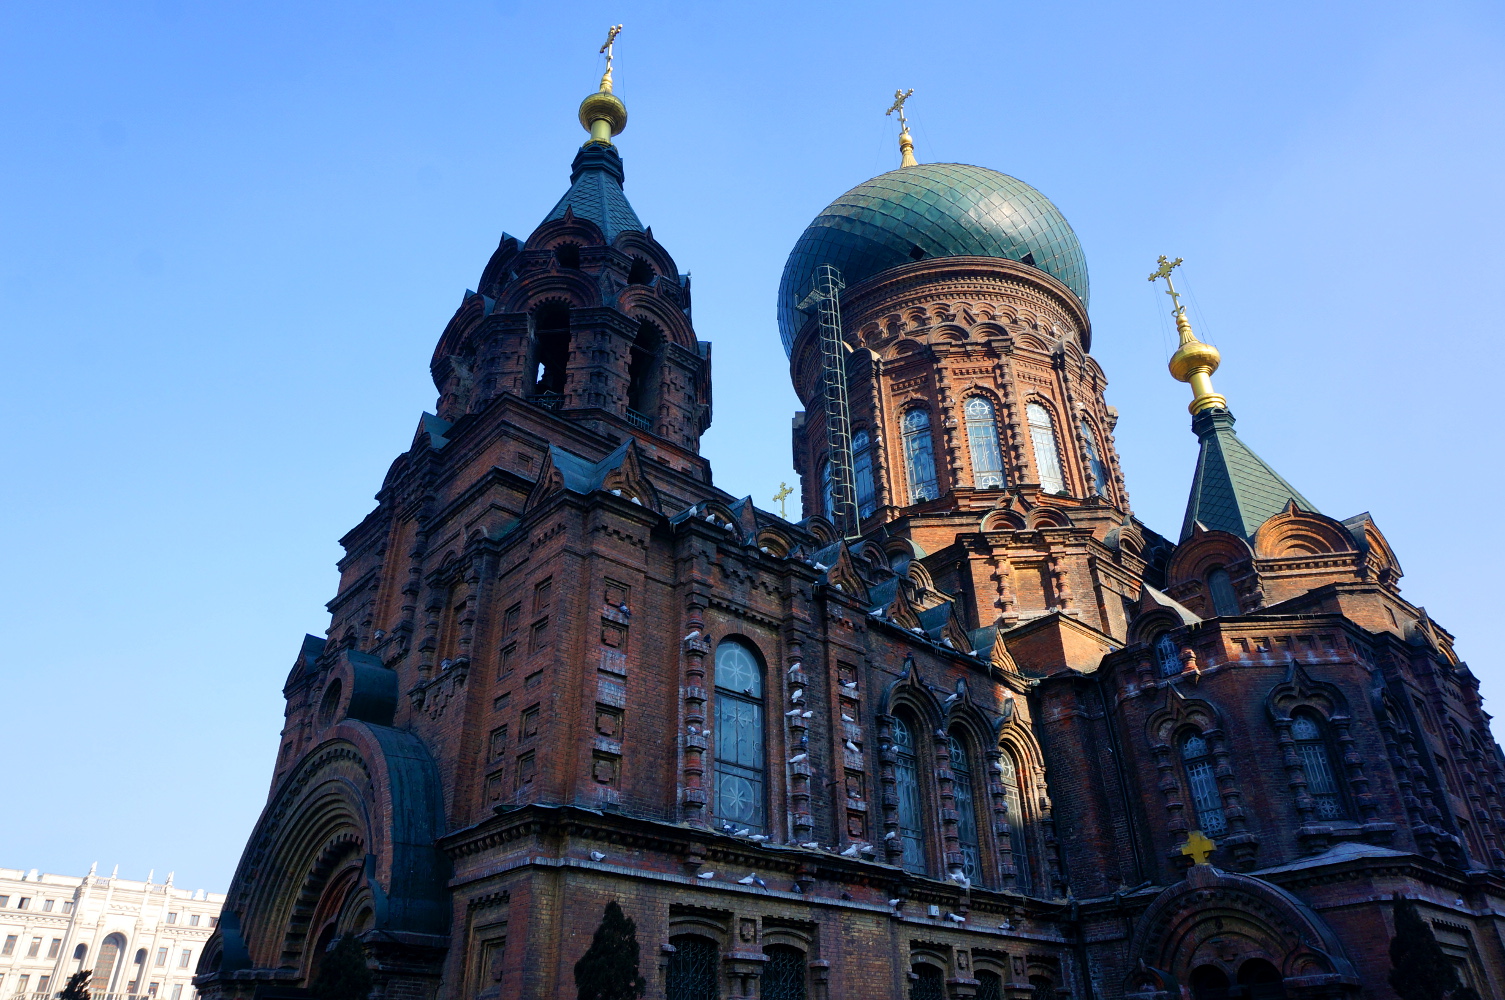 The Church of St Sophia's spires dominate Harbin's old town. Image by Anita Isalska / Lonely Planet